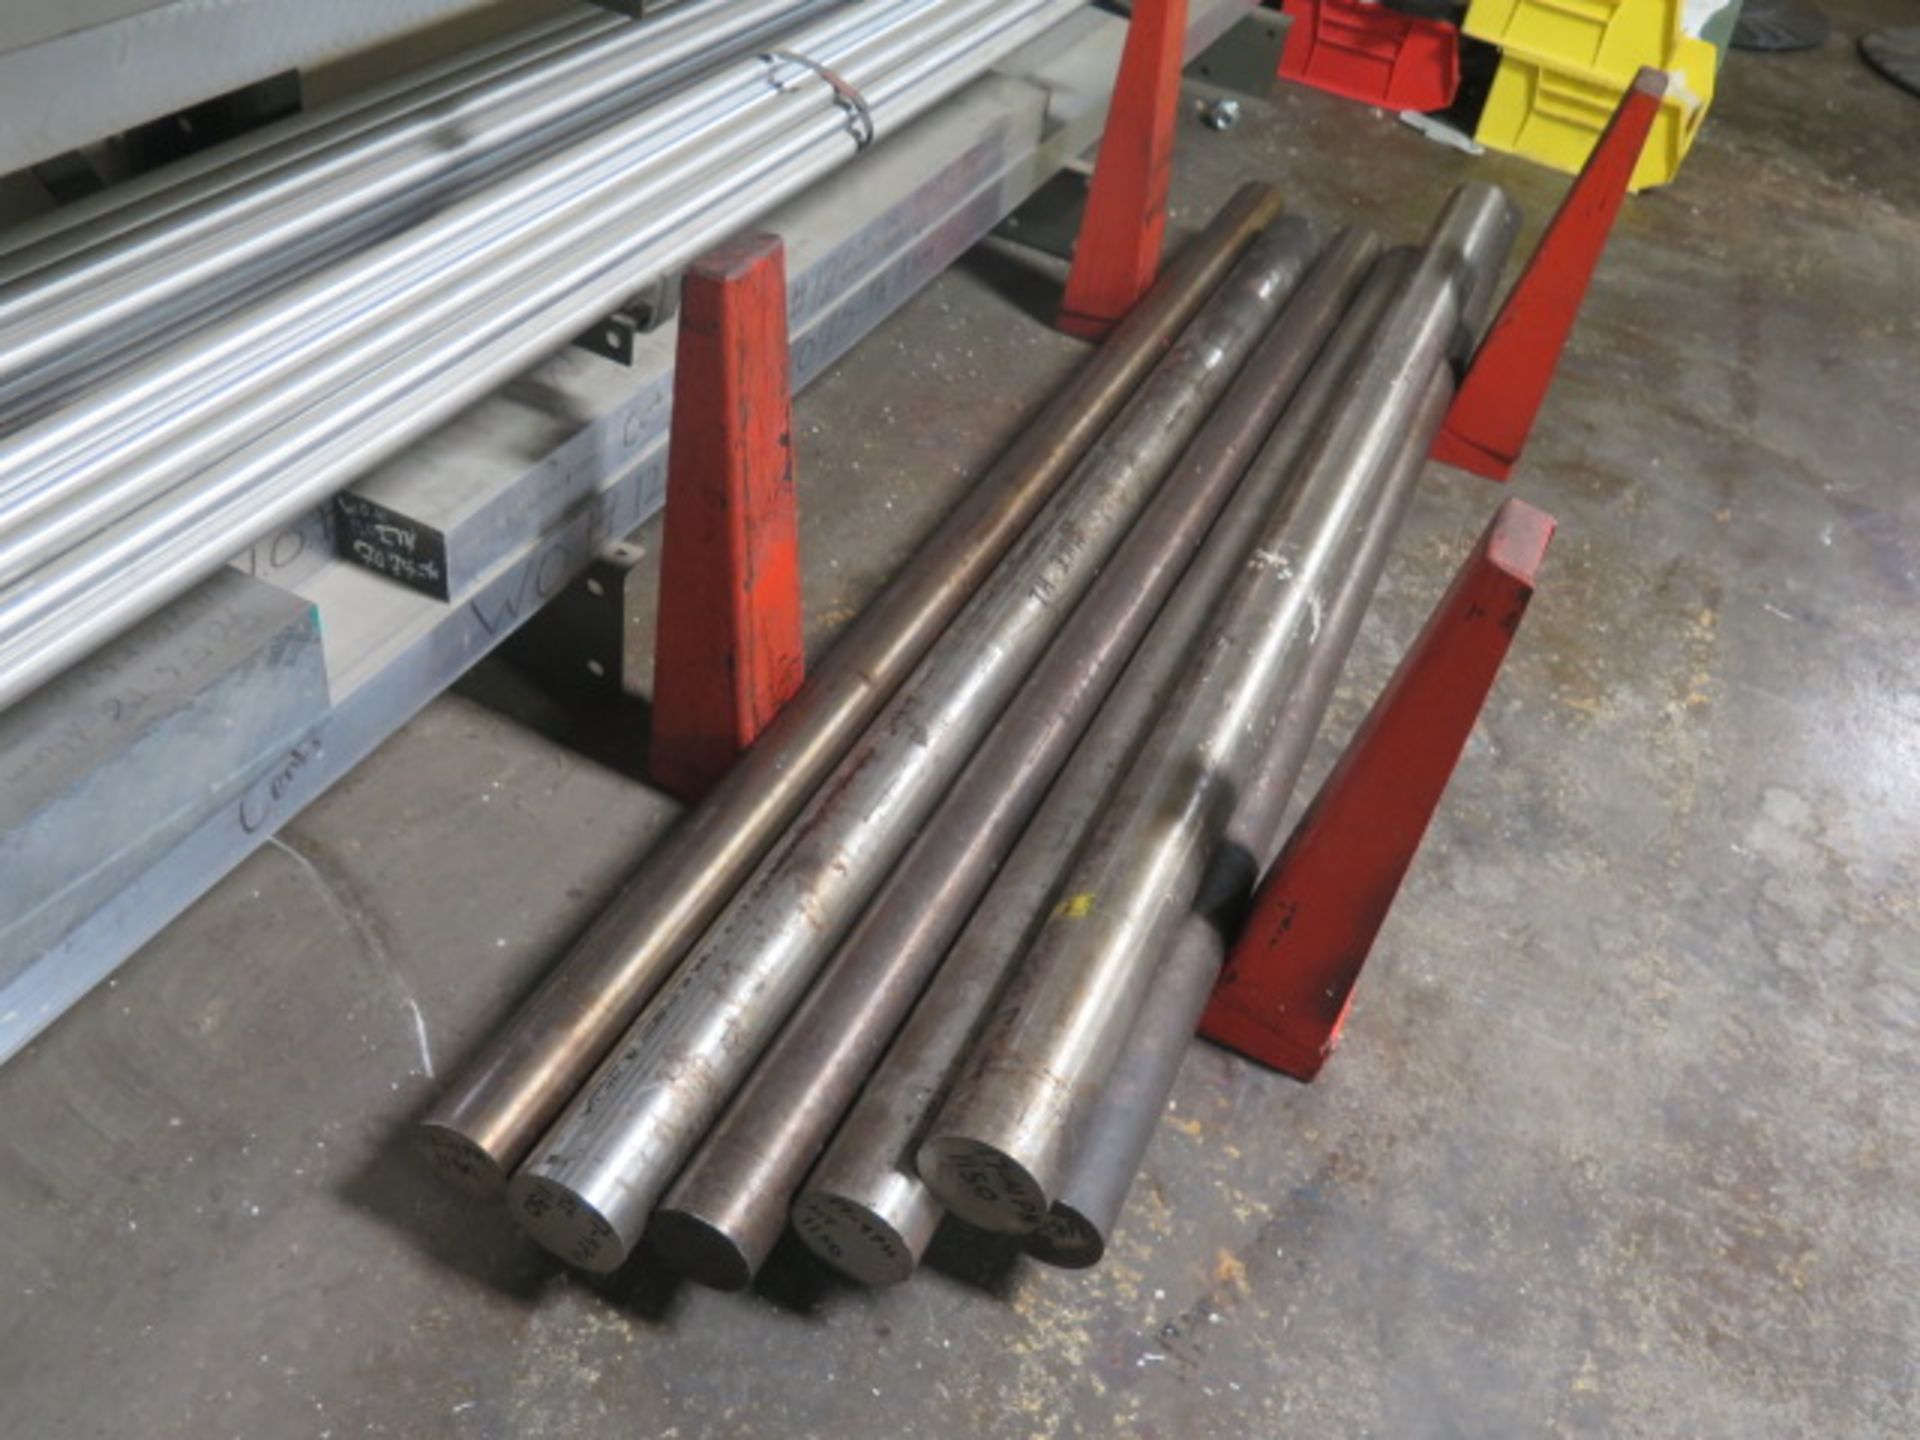 Aluminum Stainless and Cold Roll Bar Stock w/ Racks - Image 6 of 10